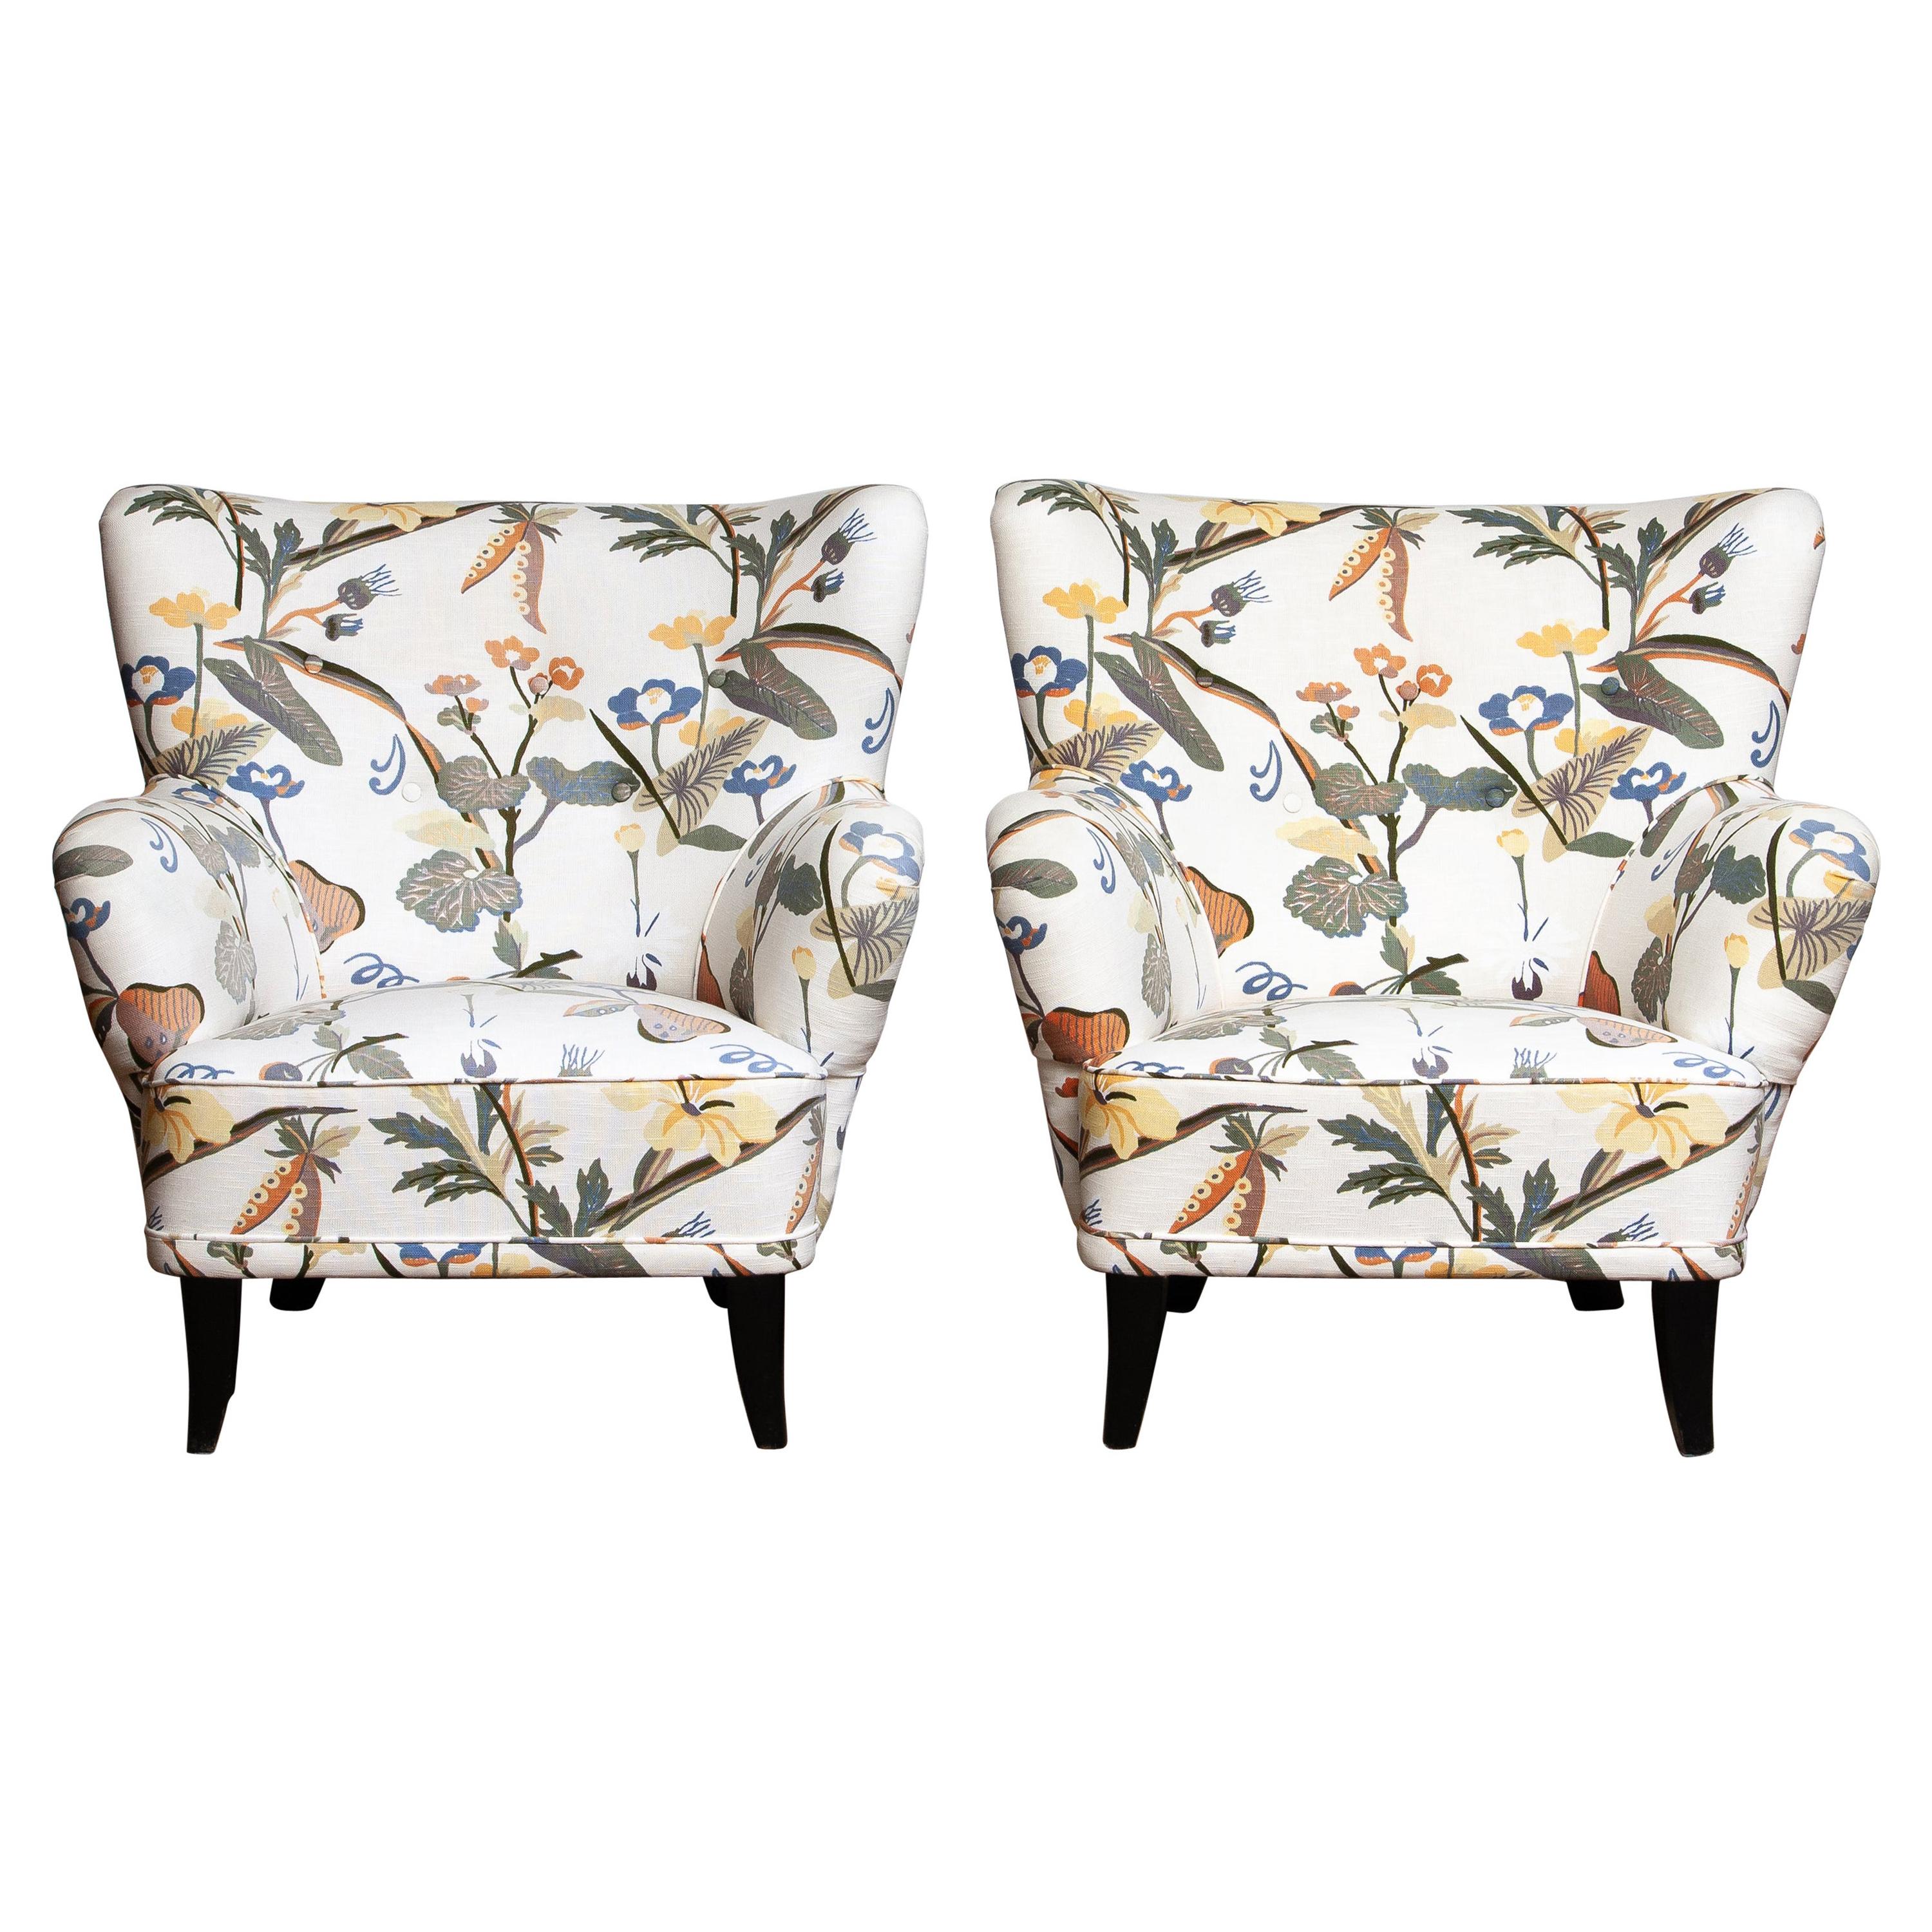 Finnish 1950s, Pair of Floral Lounge Easy Club Chairs, Ilmari Lappalainen for Asko